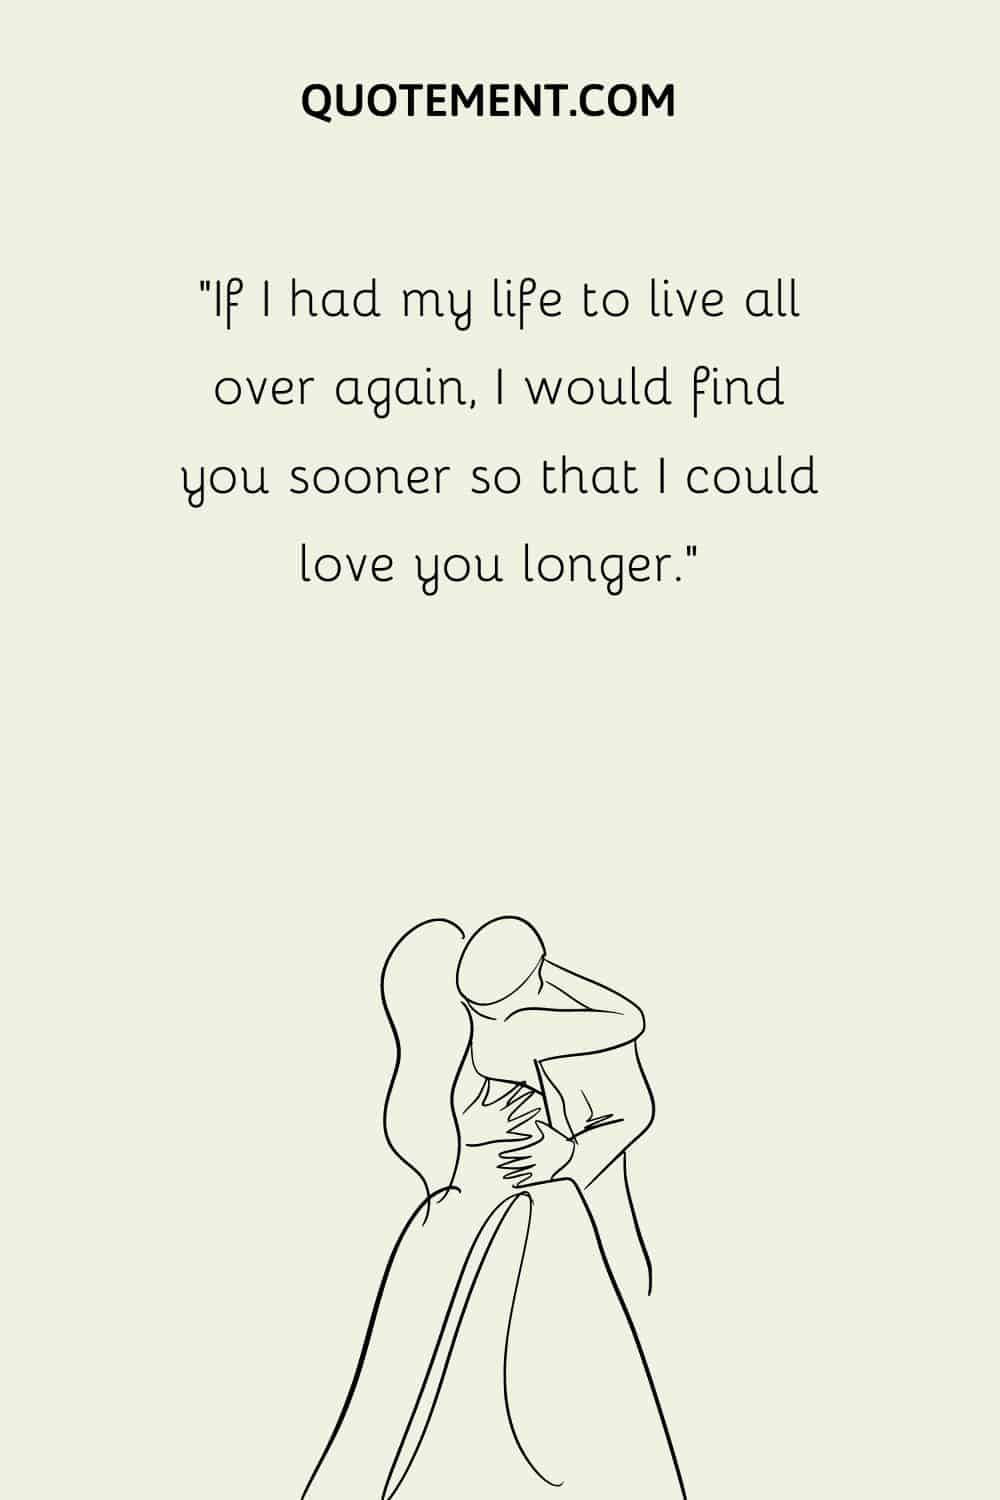 “If I had my life to live all over again, I would find you sooner so that I could love you longer.”